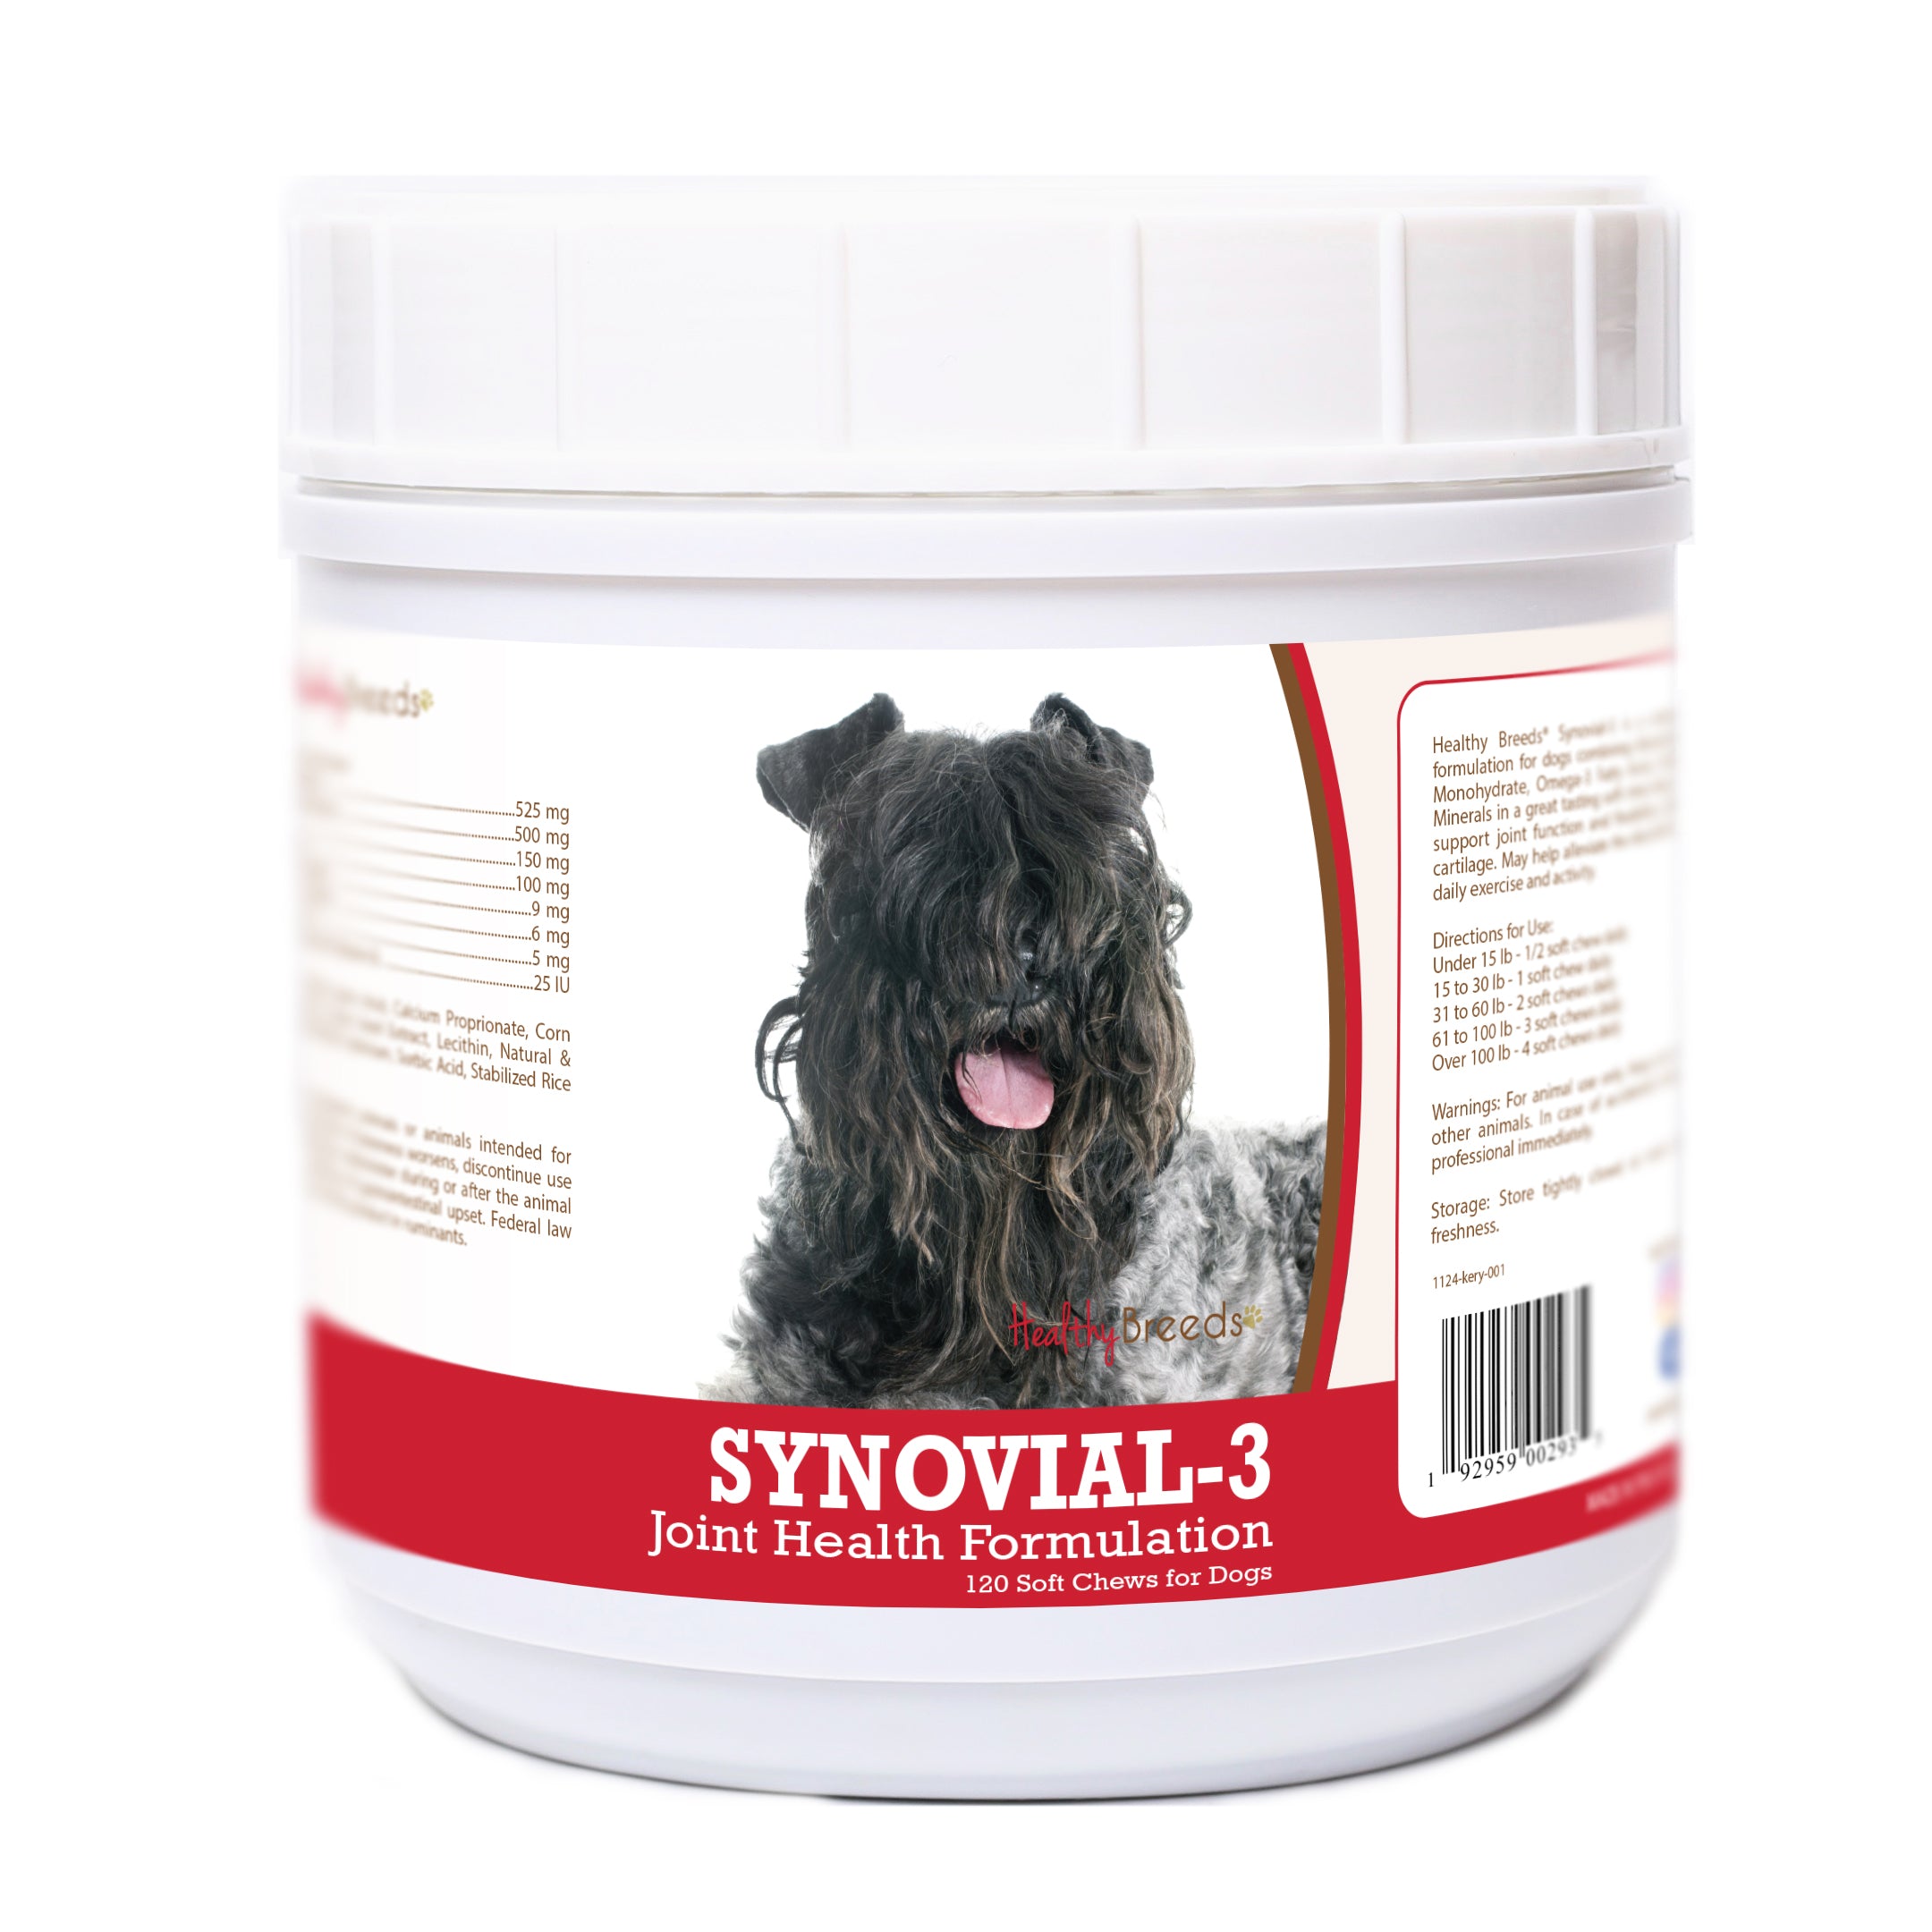 Kerry Blue Terrier Synovial-3 Joint Health Formulation Soft Chews 120 Count